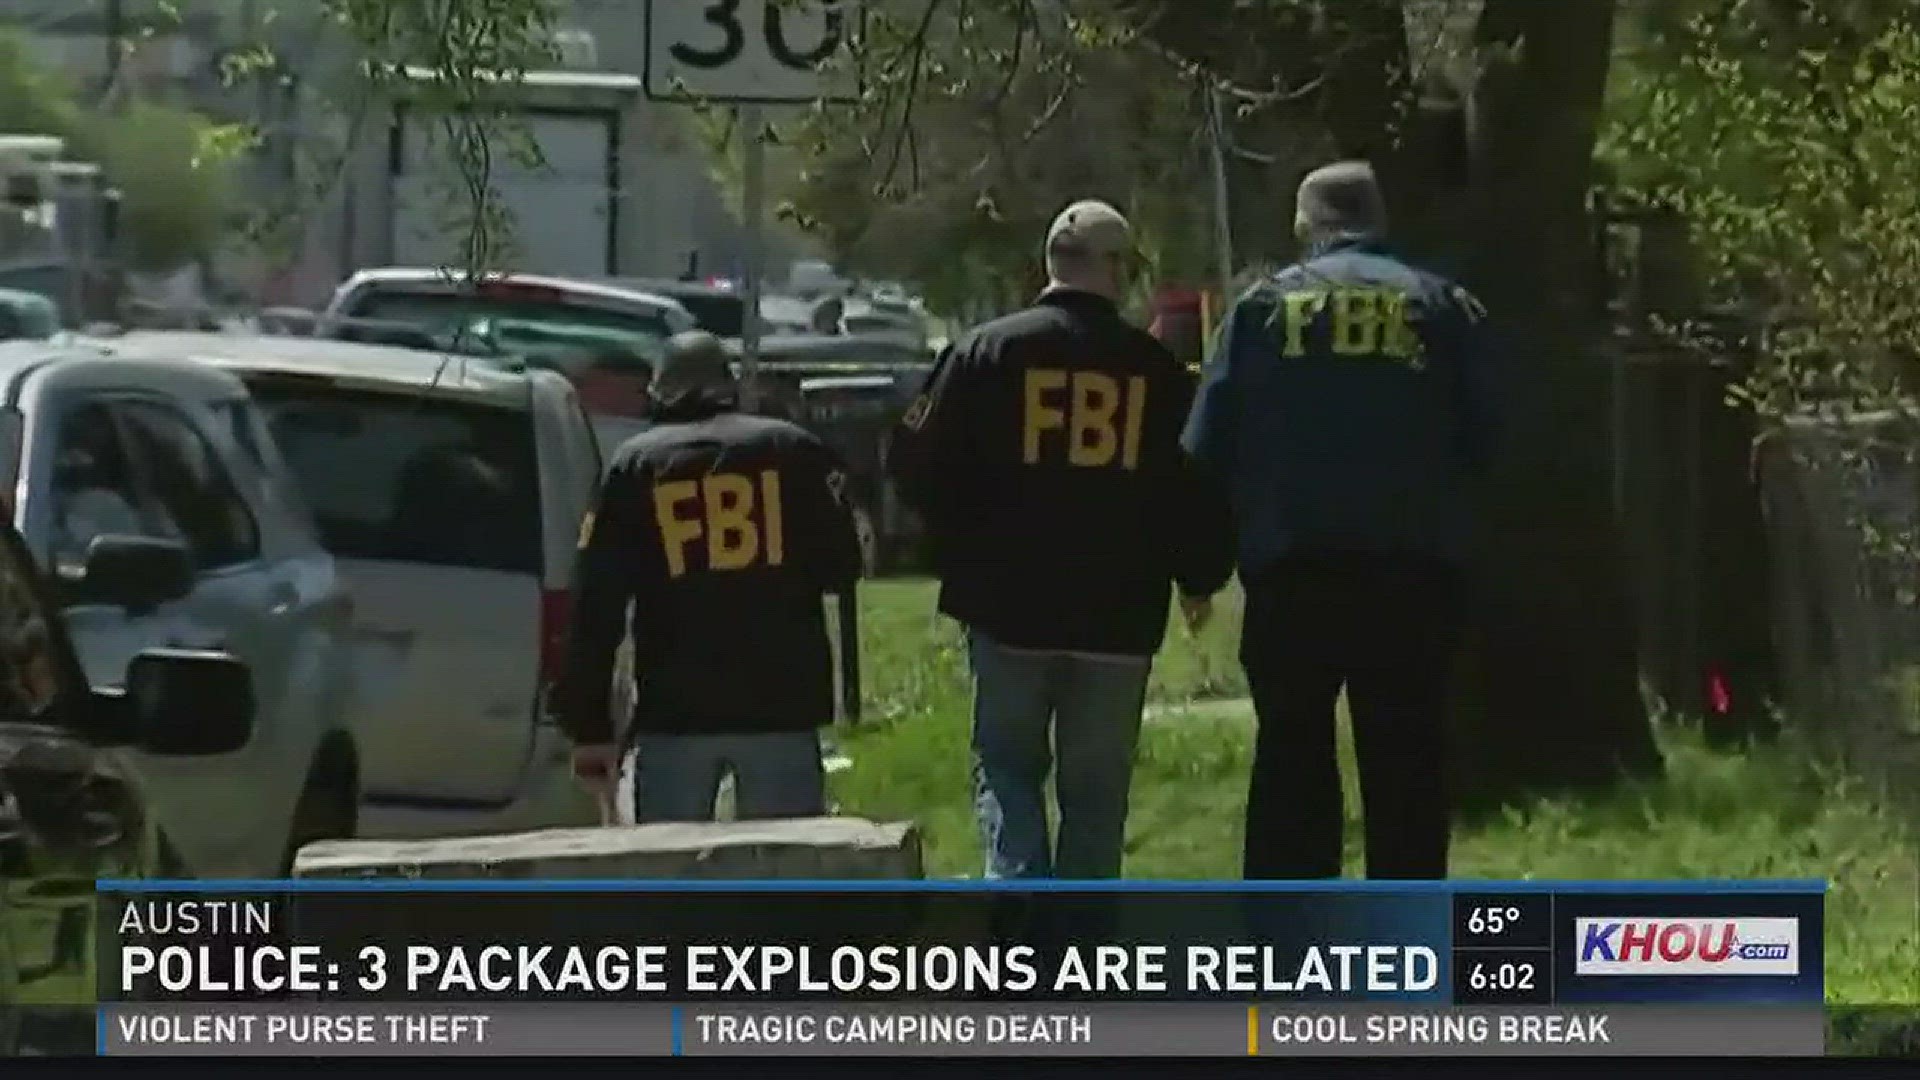 Law enforcement officers are on high alert after three suspicious packages that exploded were found in Austin.